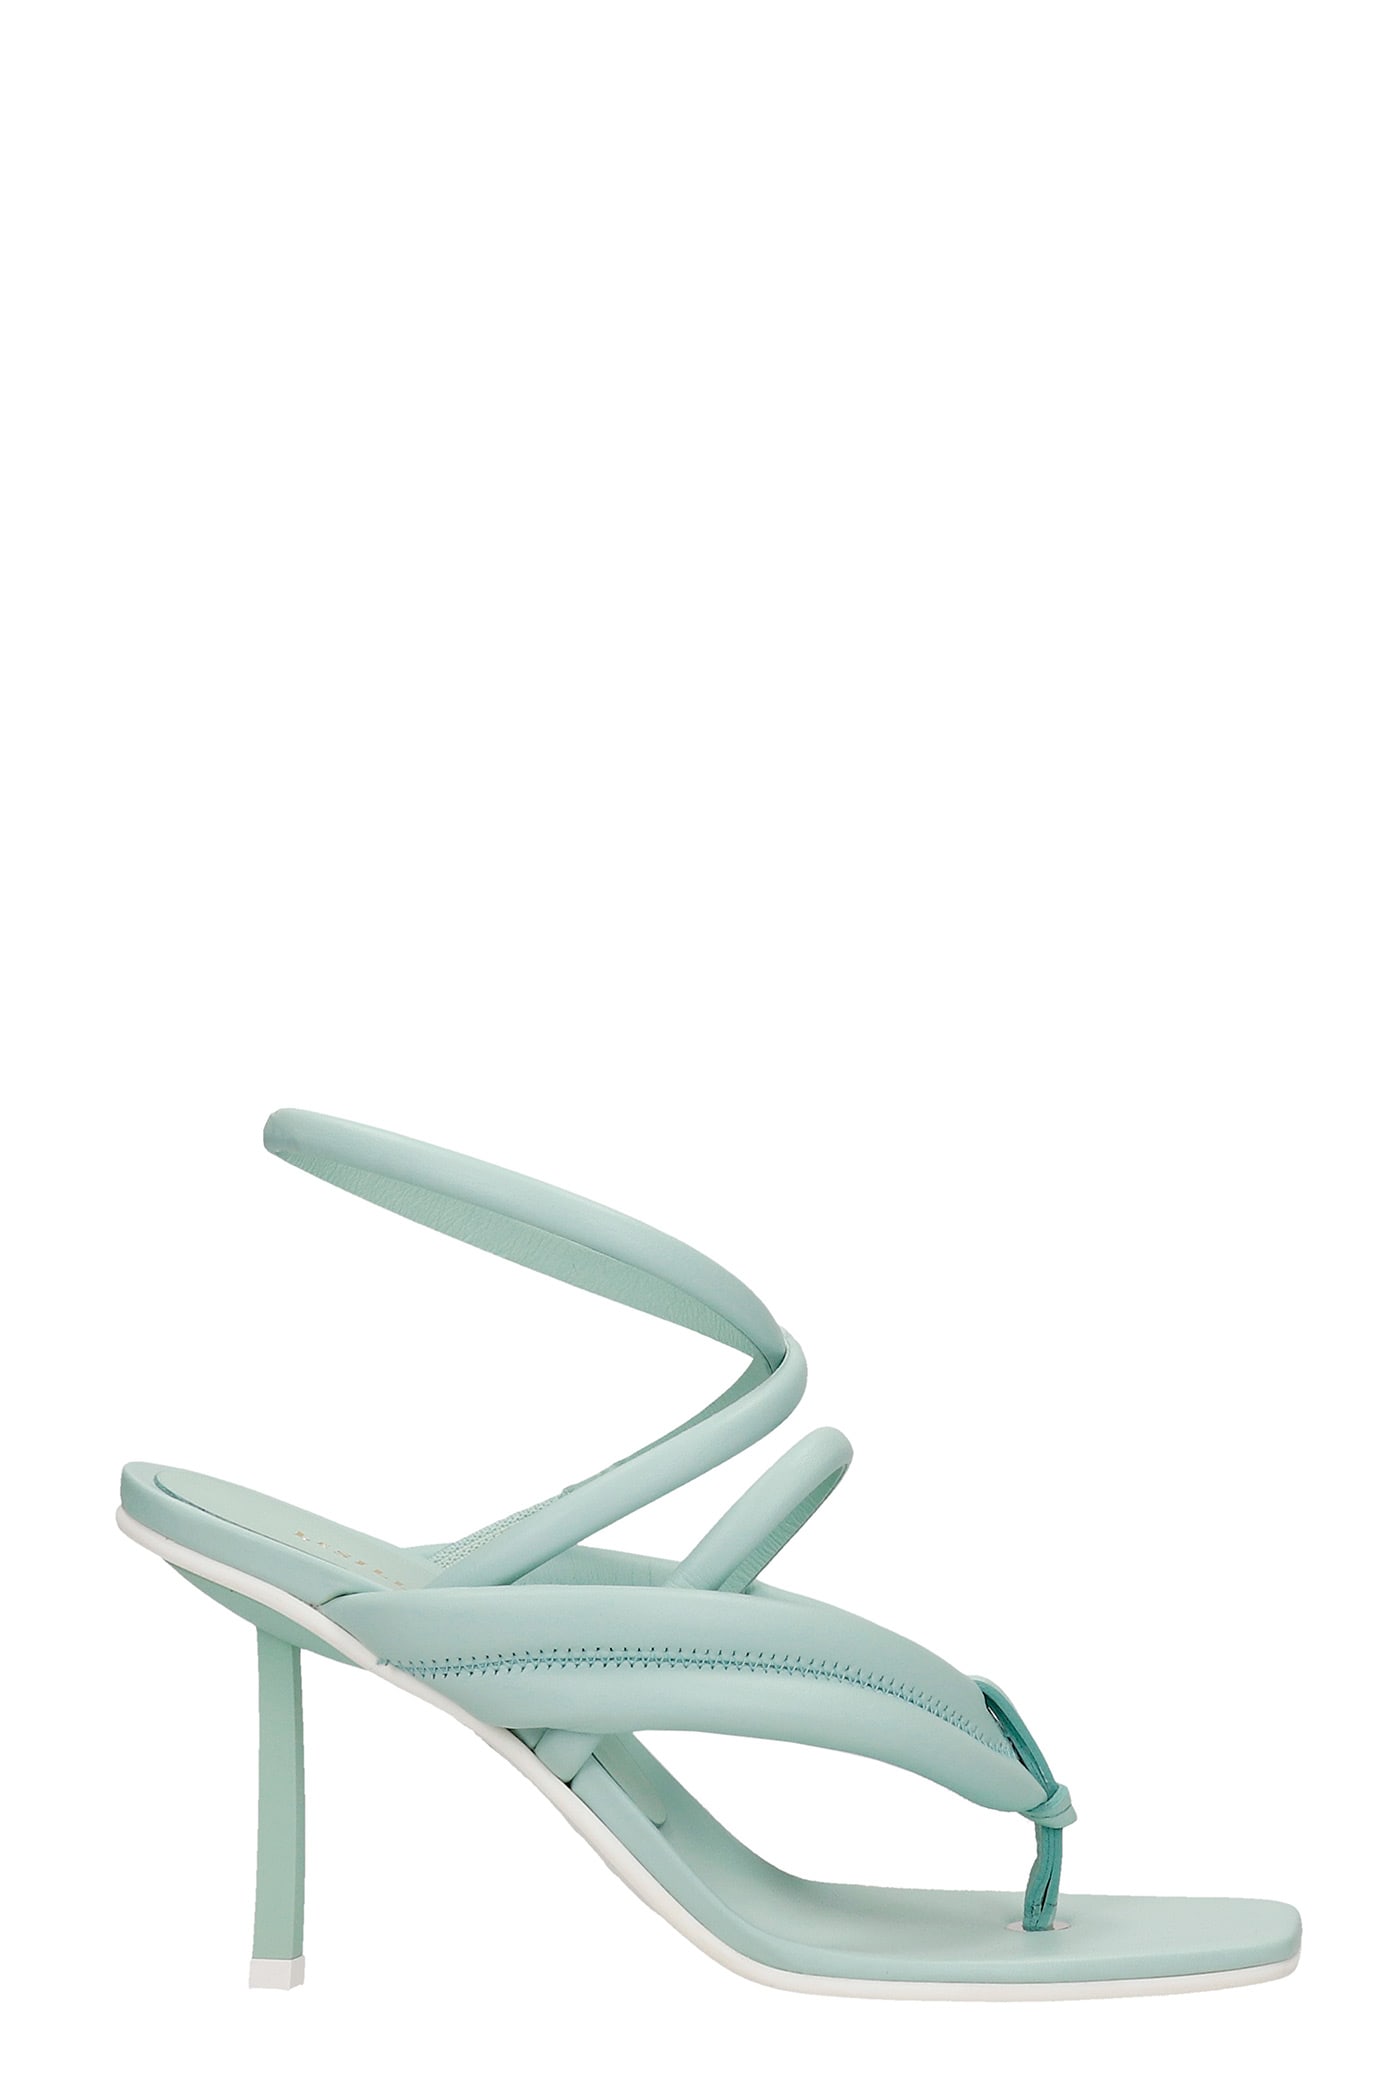 LE SILLA SANDALS IN GREEN LEATHER,5143S080H1PPCHI090